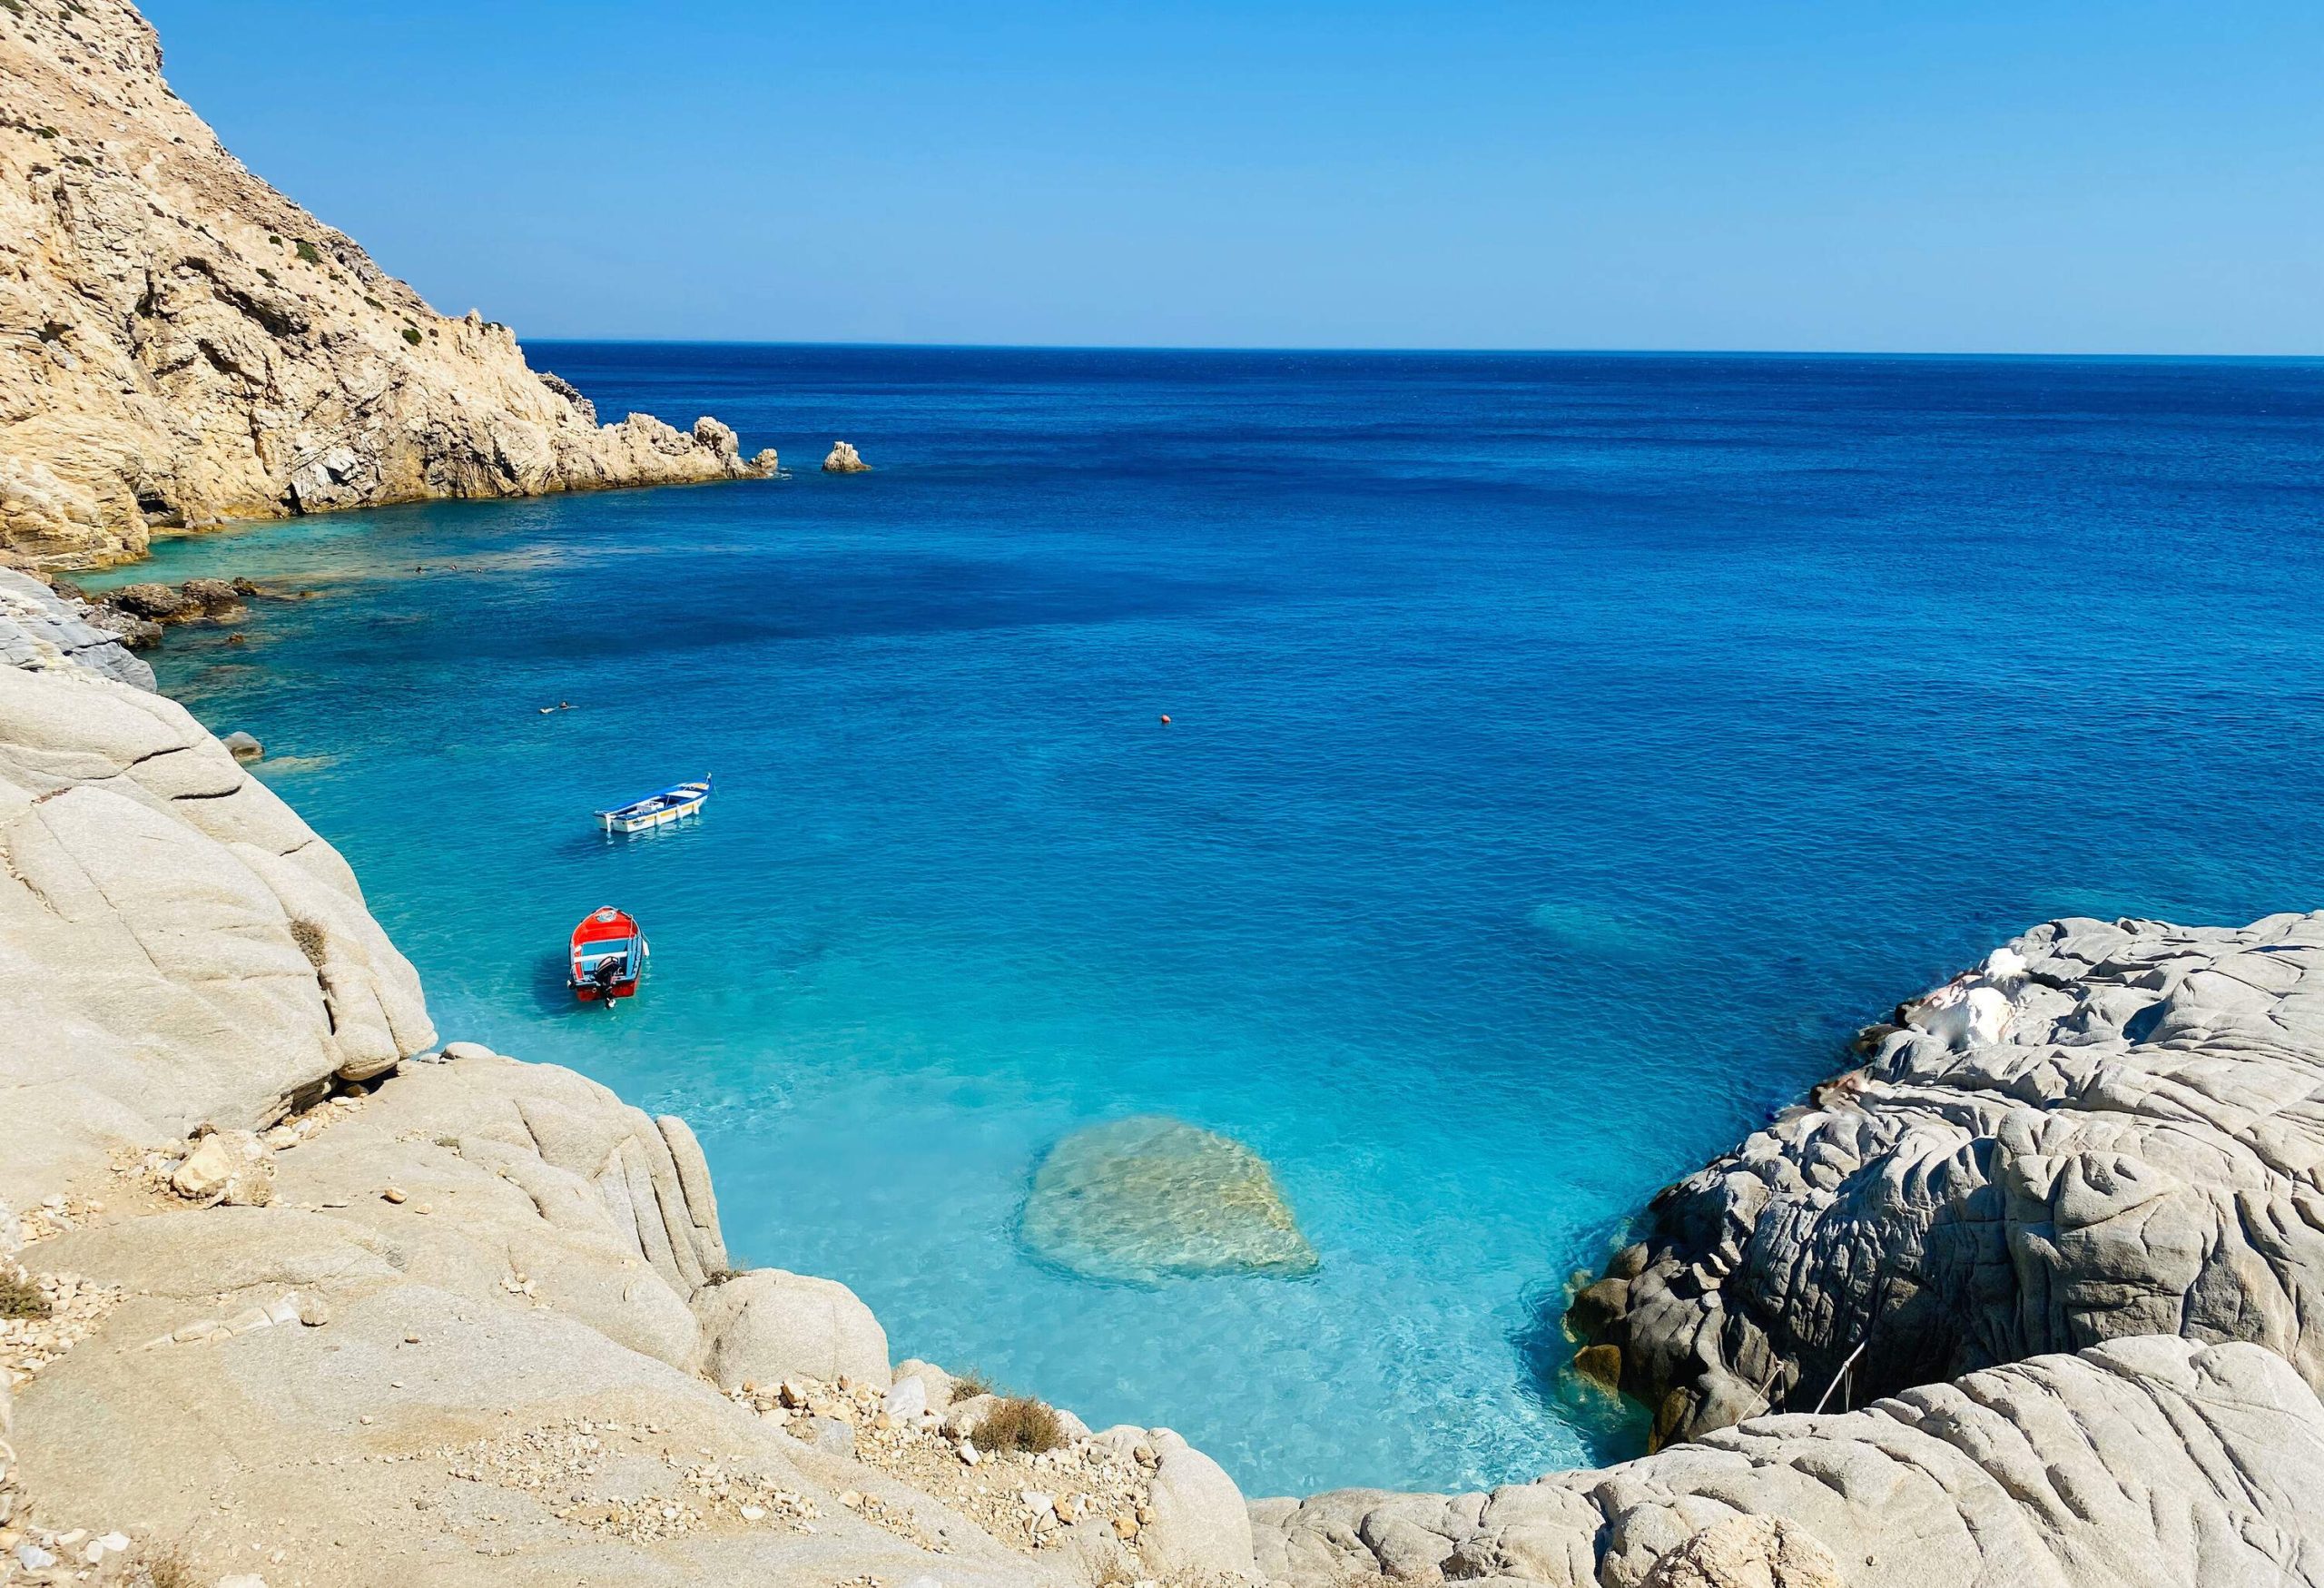 A breathtaking crystal clear turquoise sea with red and white boats moored alongside the rugged rocky coast.